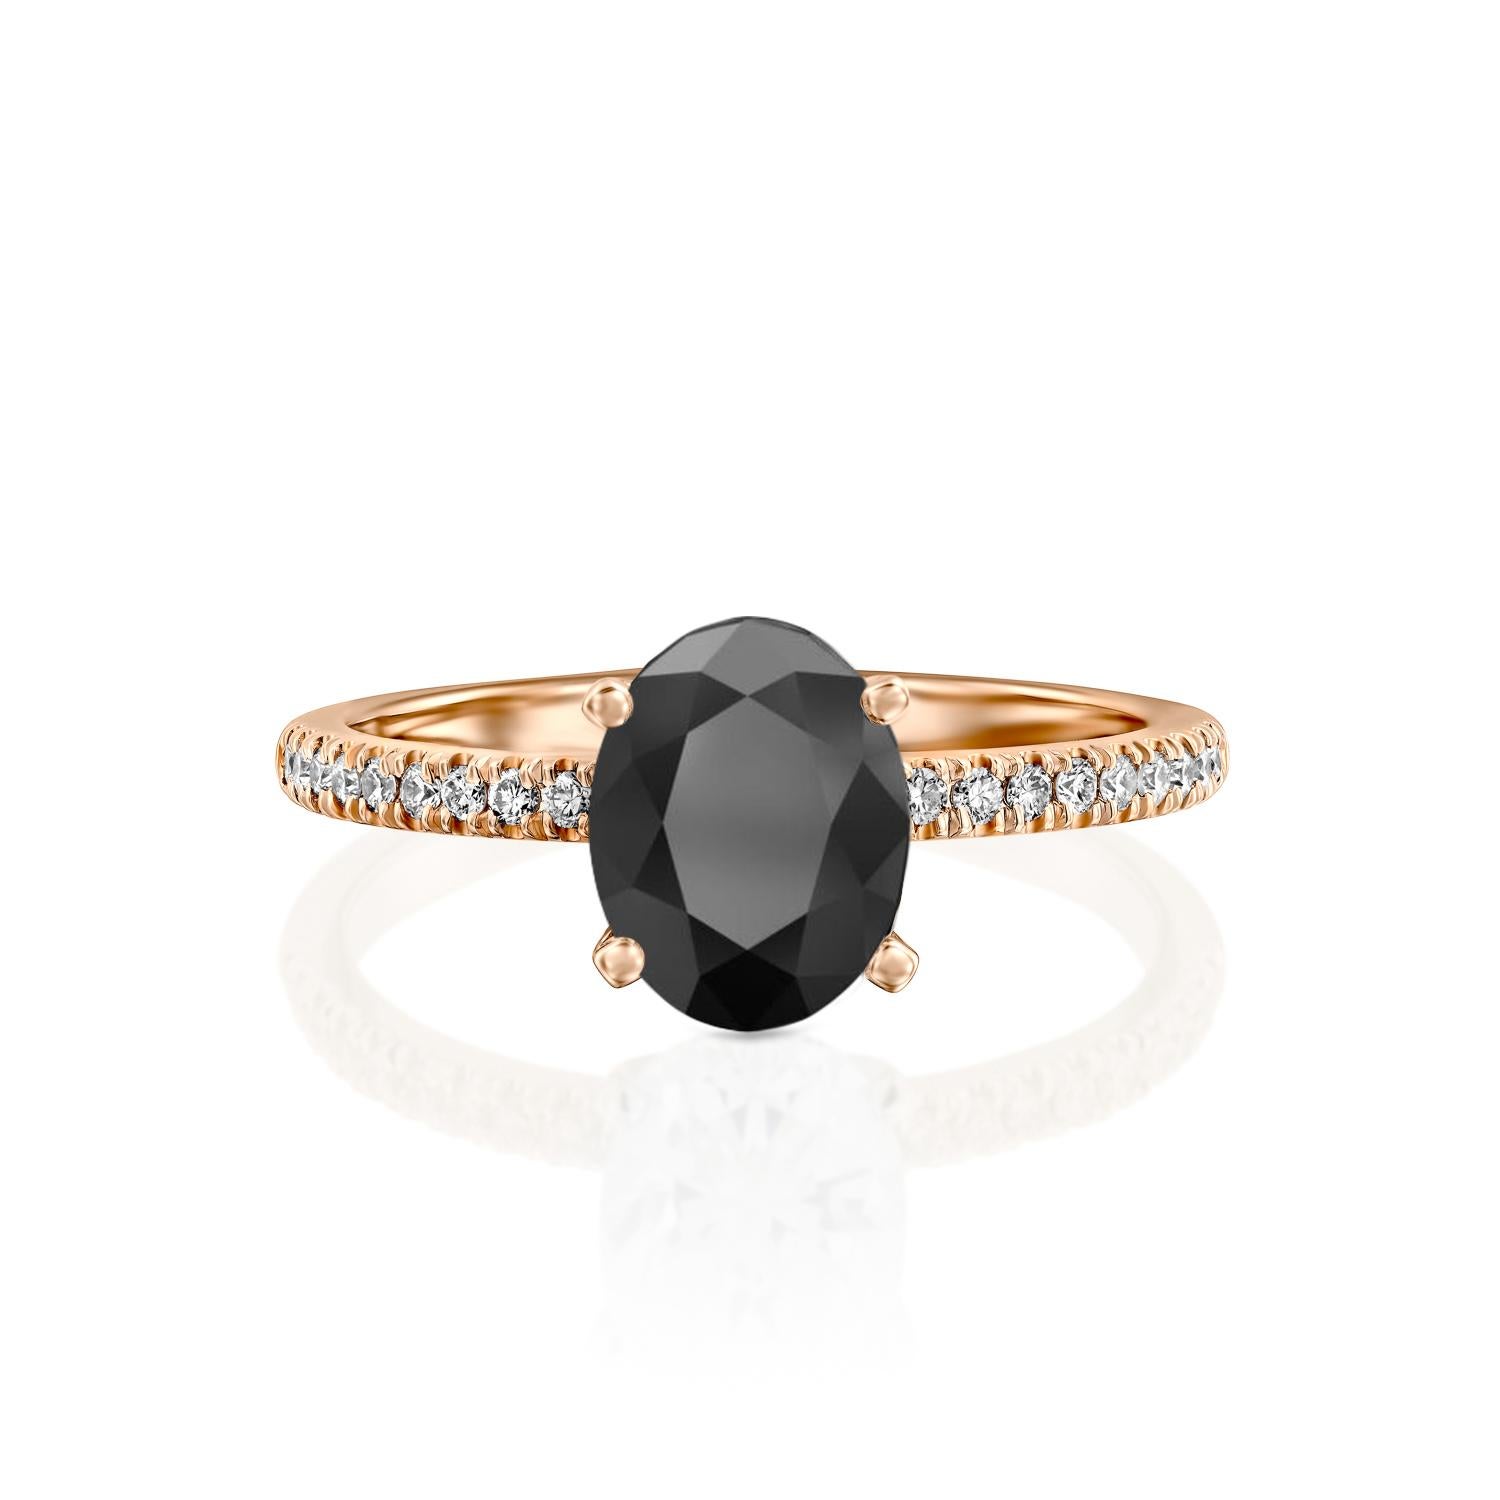 Beautiful solitaire with accents vintage style diamond engagement ring. Center stone is natural, oval shaped, AAA quality black diamond of 1.5 carat and it is surrounded by smaller natural diamonds approx. 0.15 total carat weight. The total carat